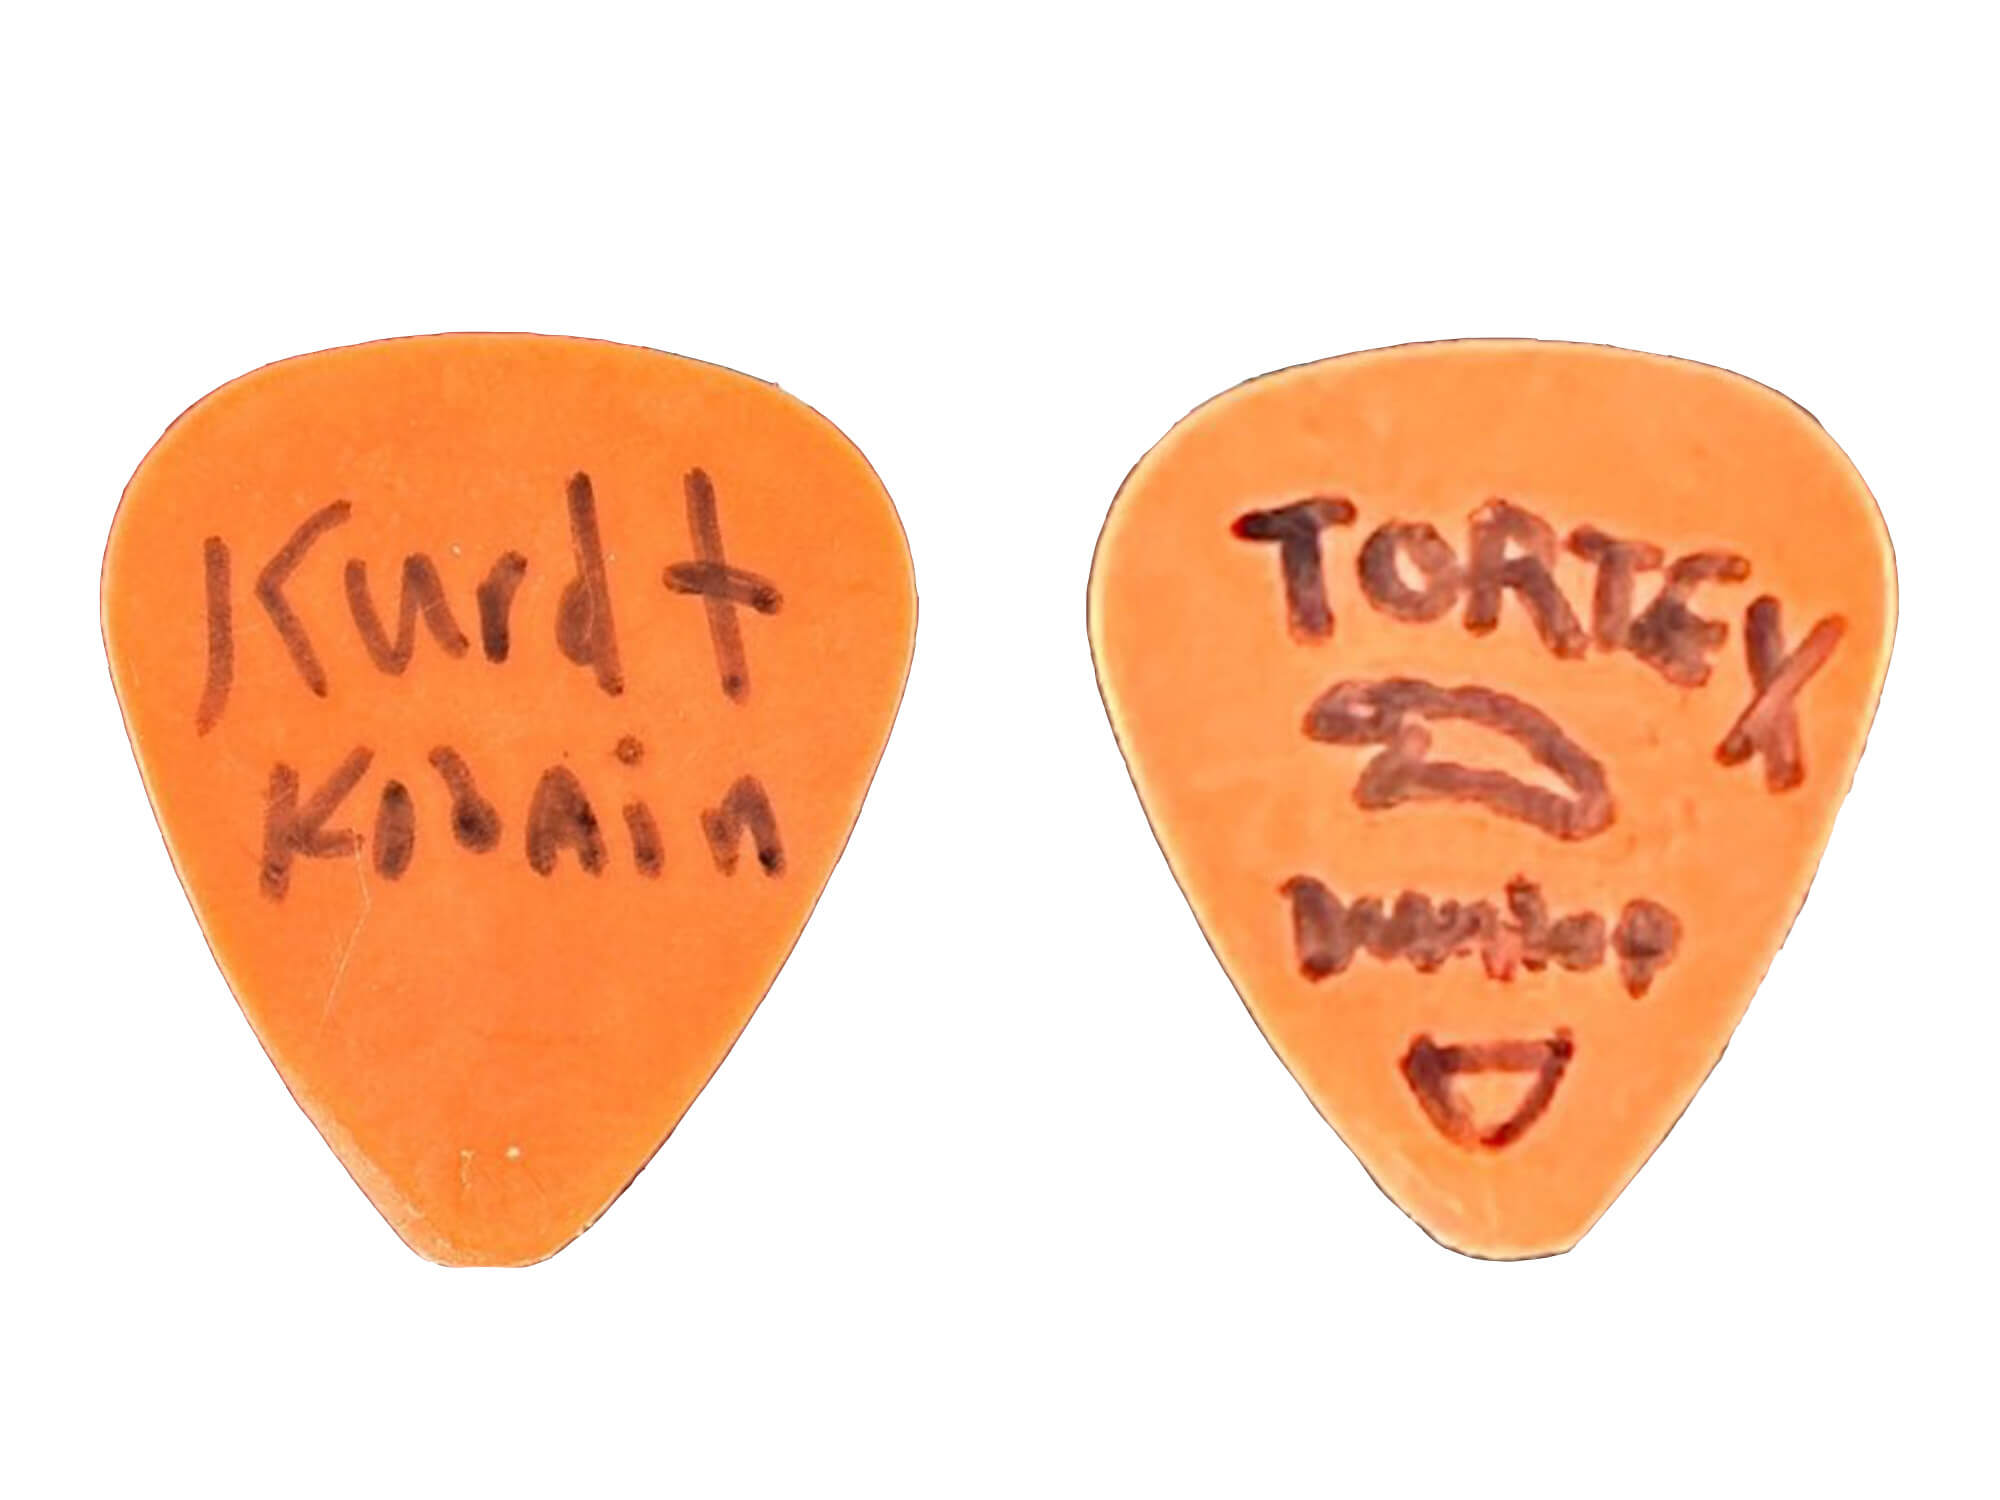 Side by side image of the front and back of the orange pick with Kurt's writing on